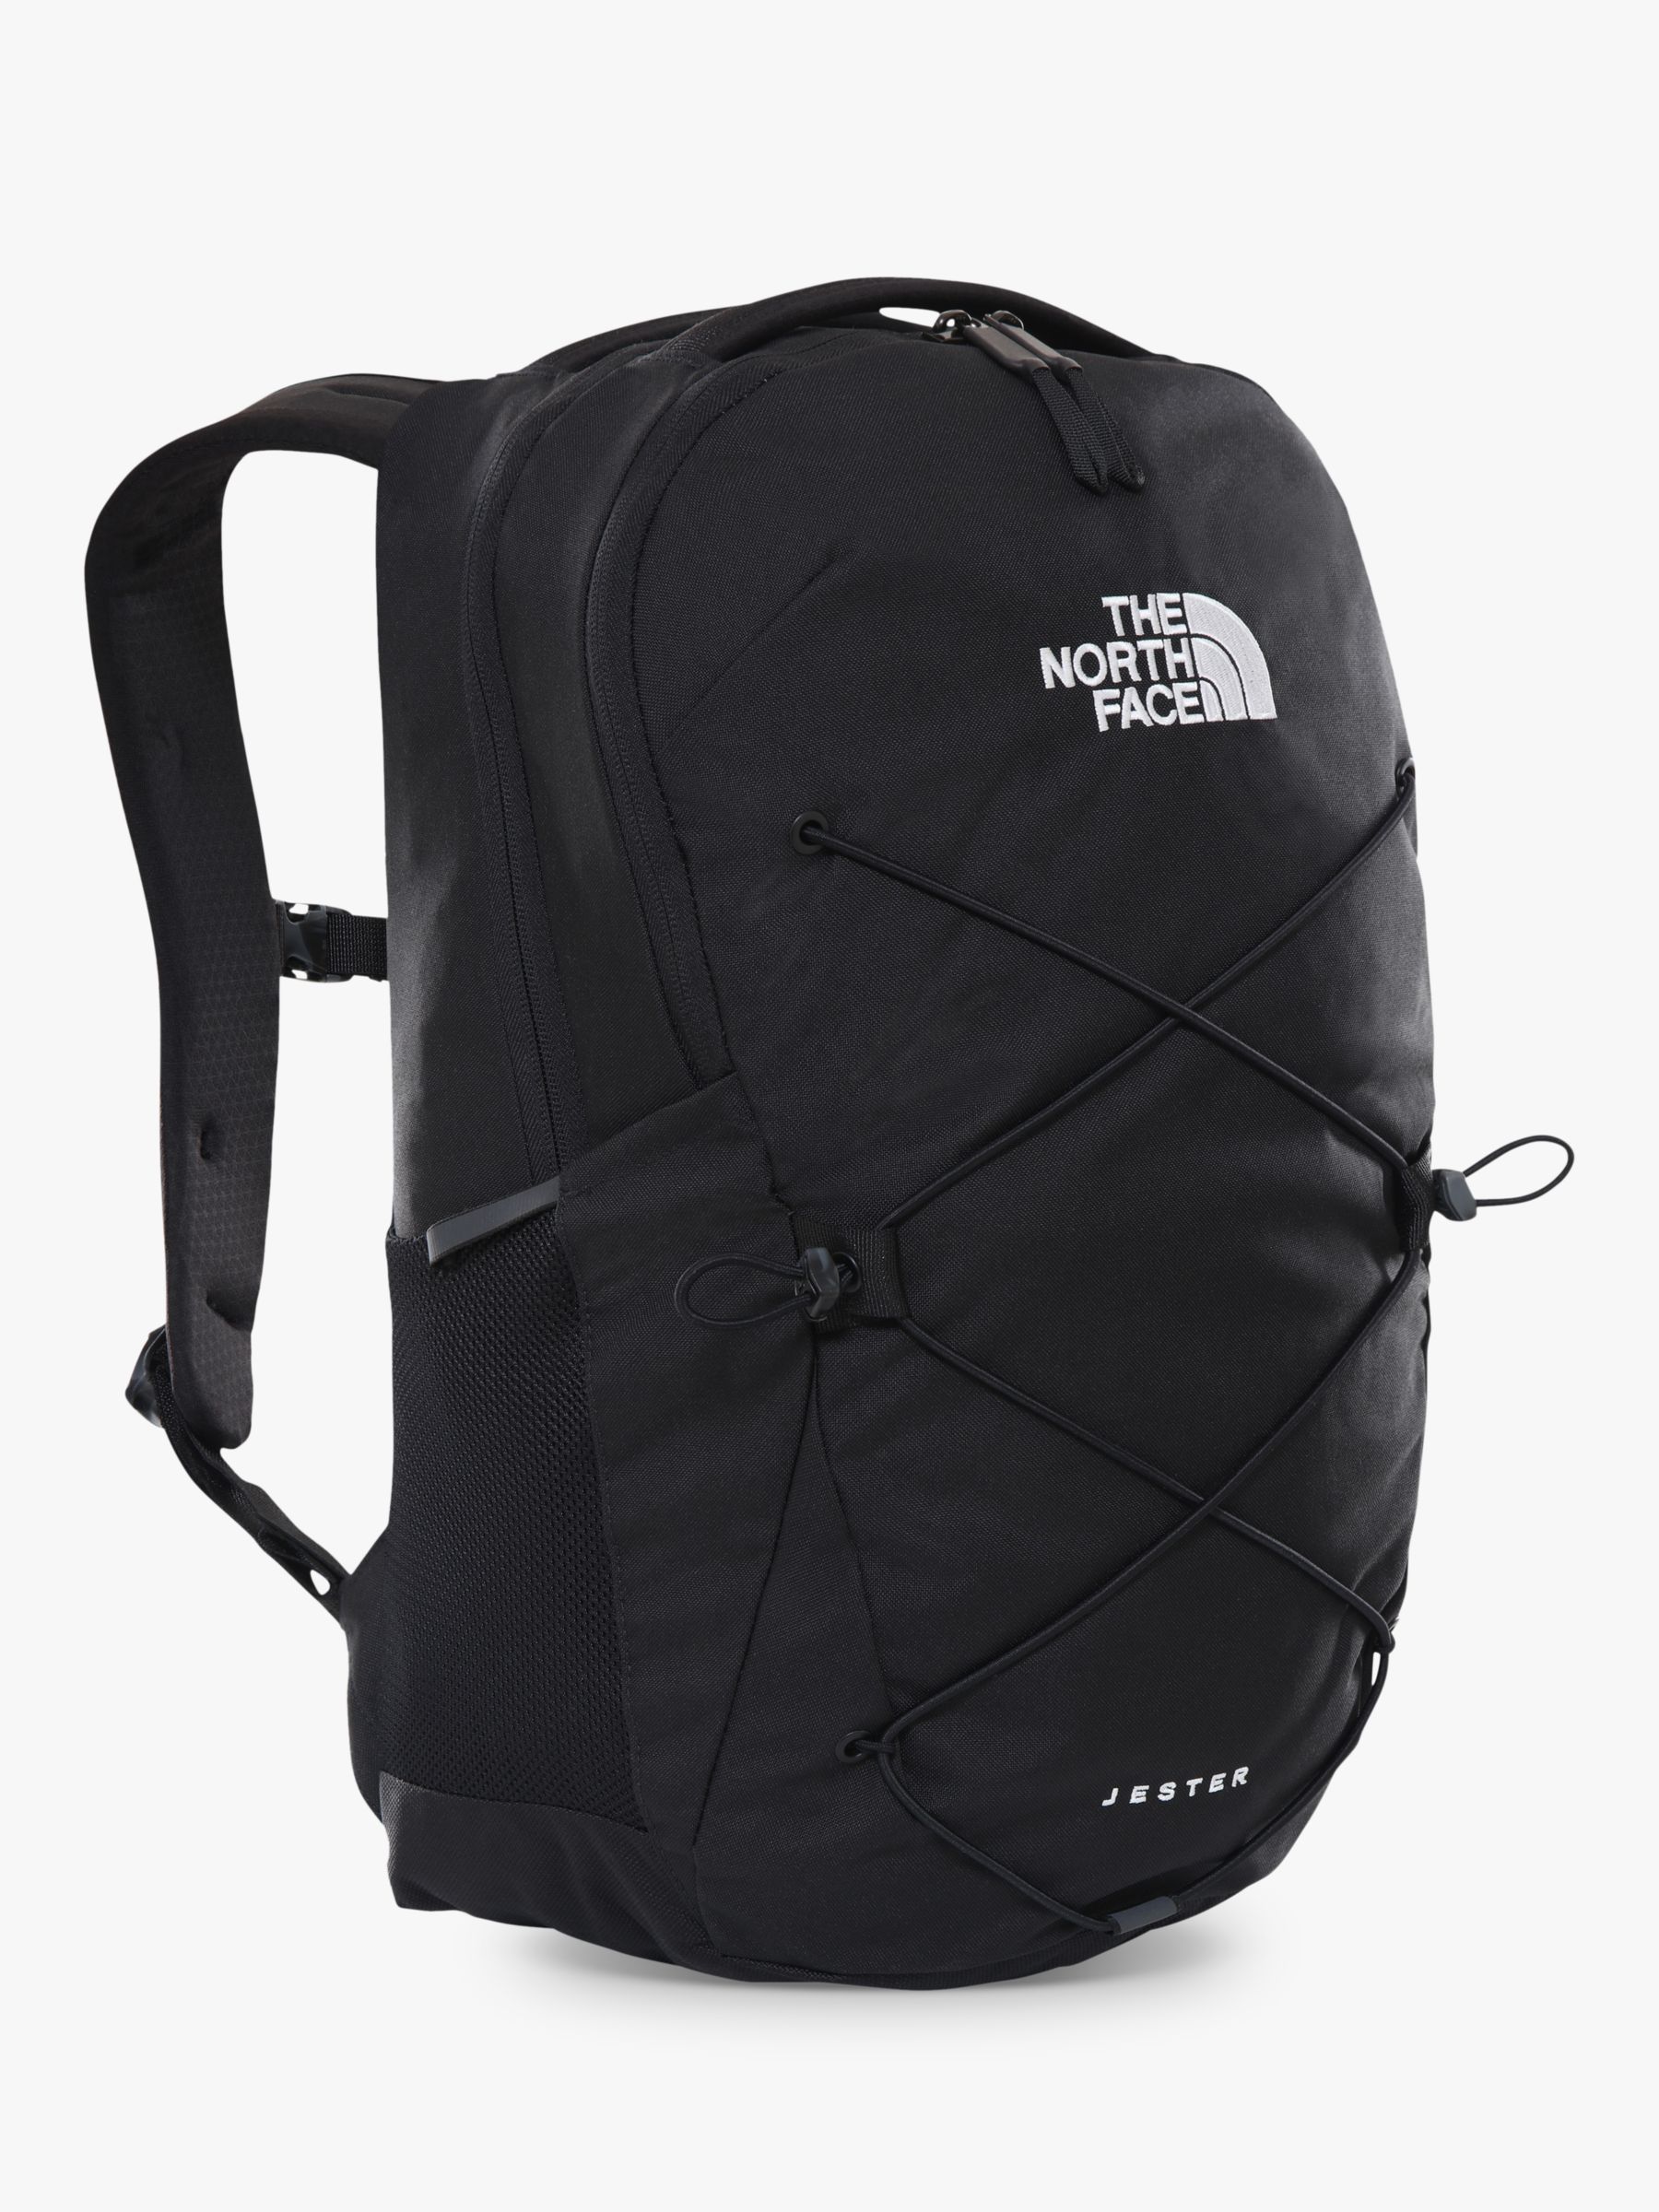 north face jester backpack dimensions